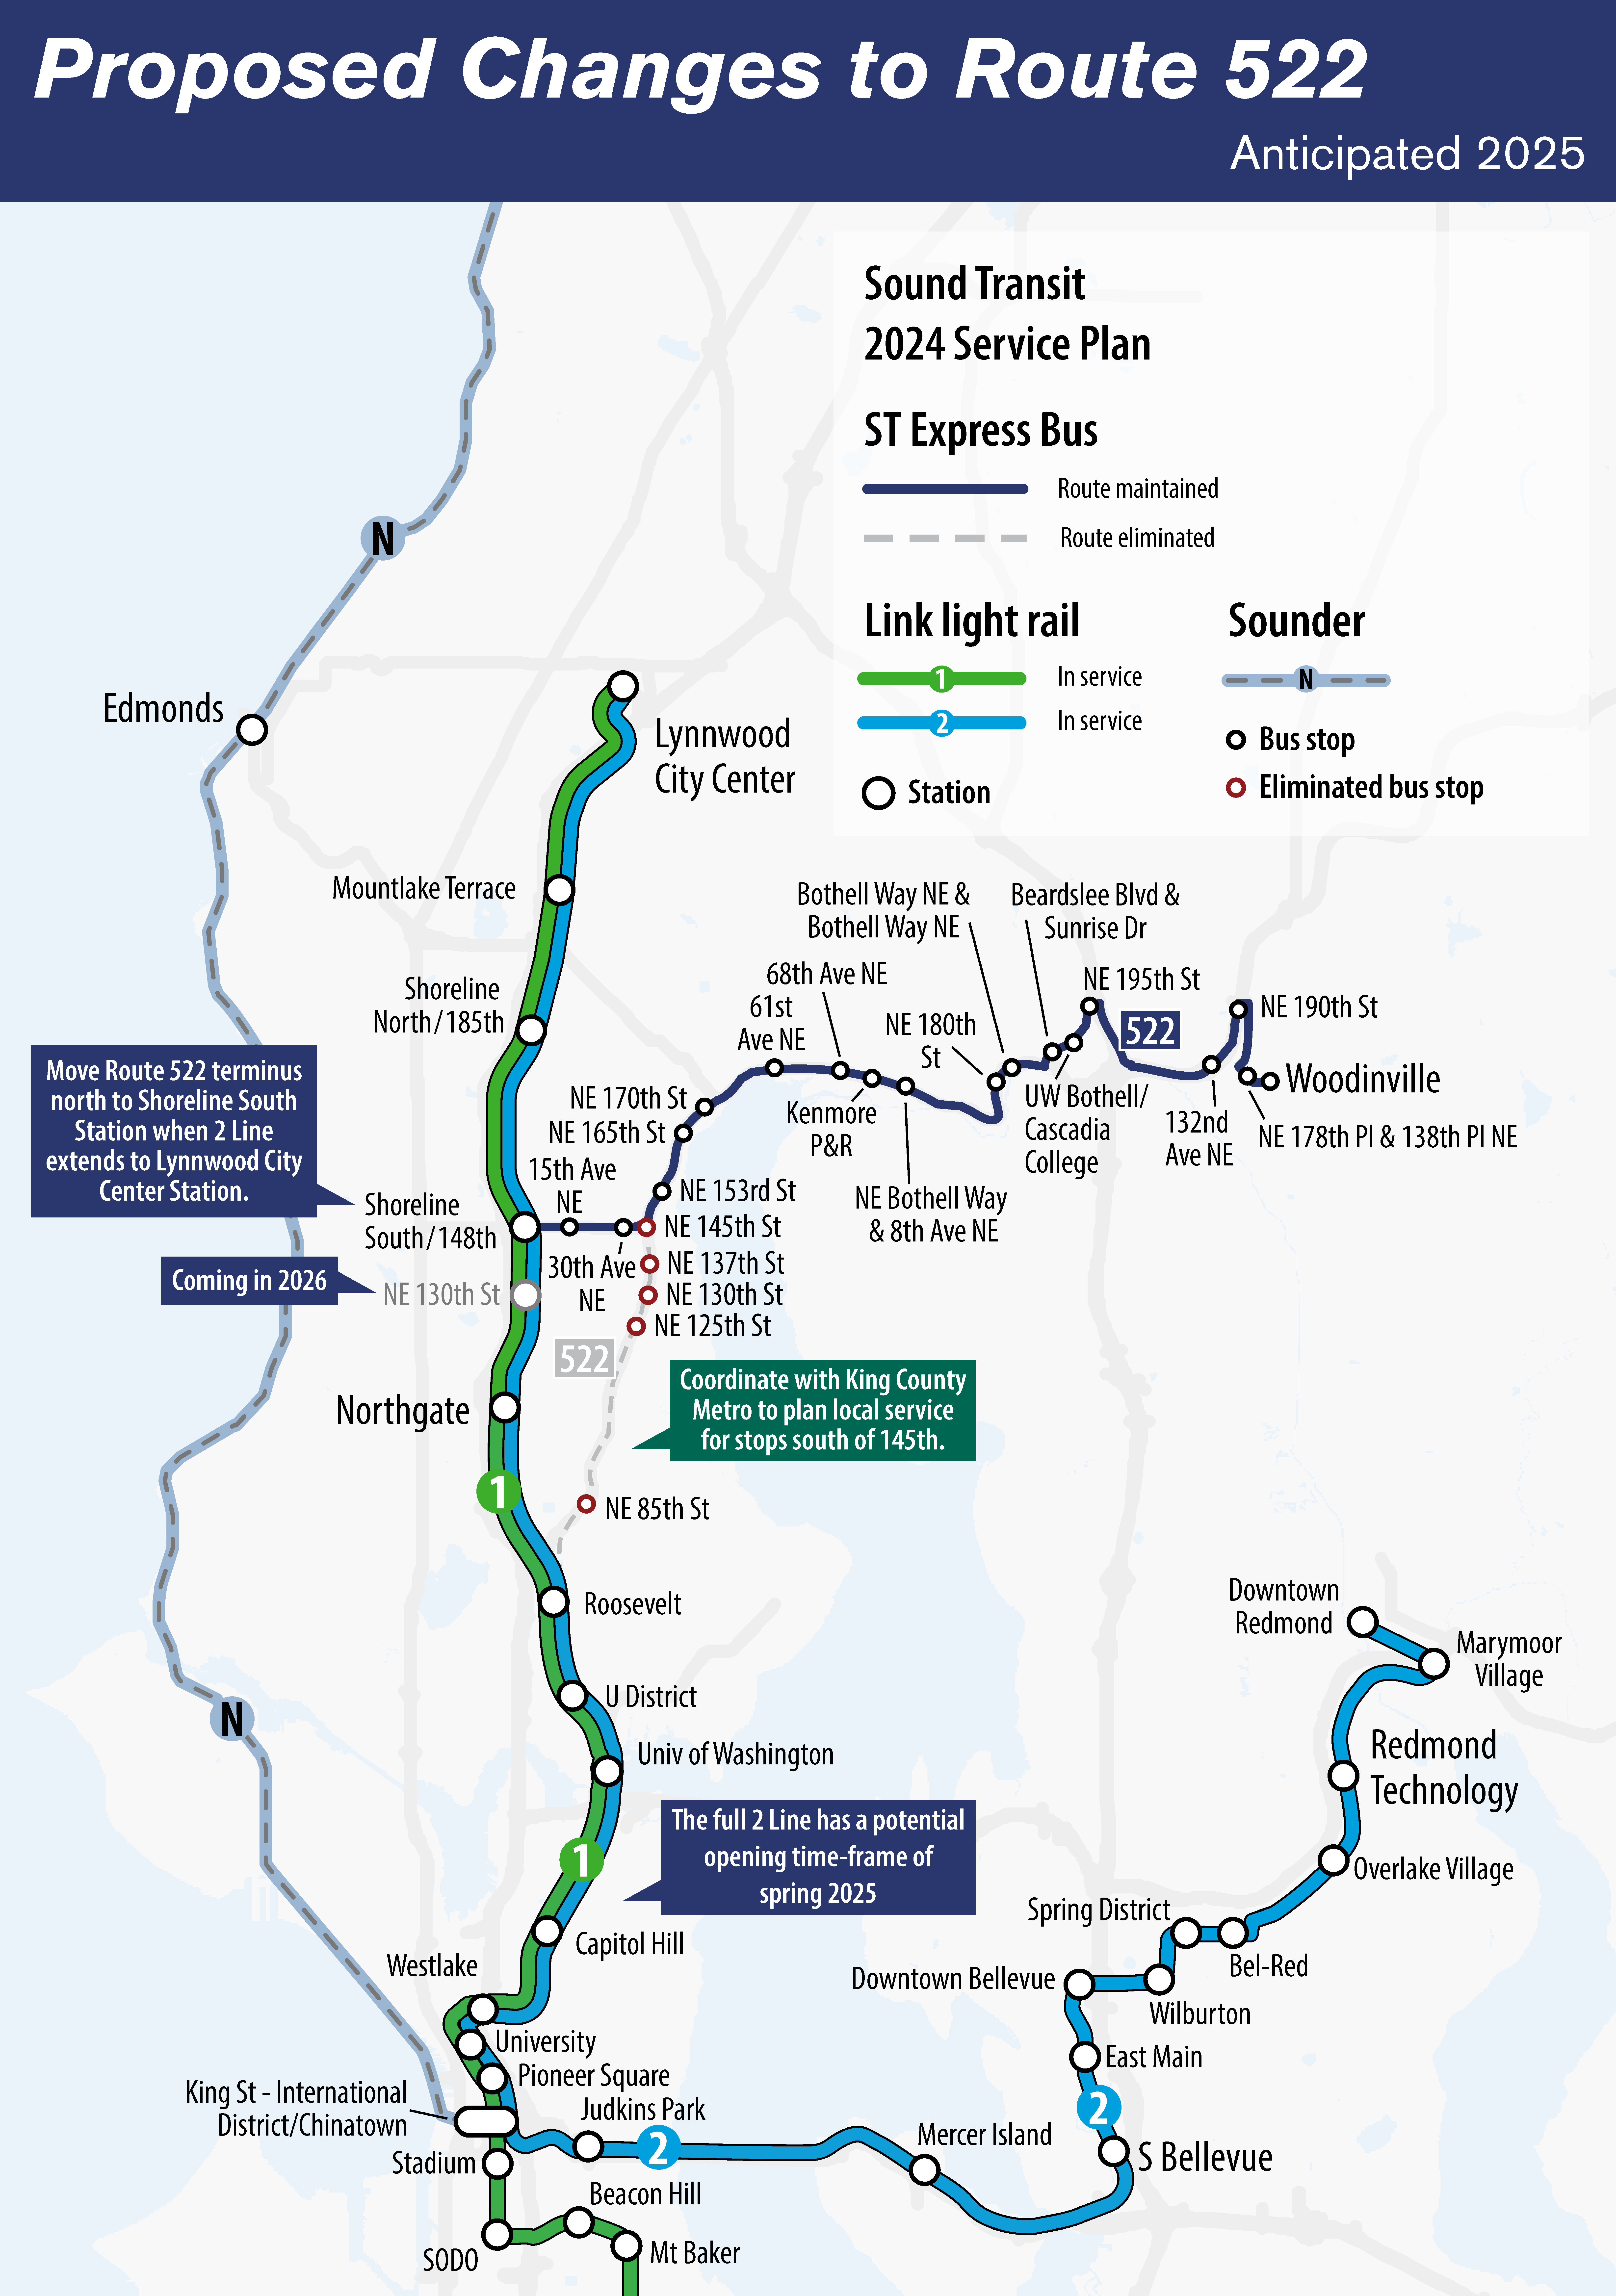 A map showing Express route 522 as it relates to Sound Transit's transit services in Seattle and the north and east subareas that include Everett, Seattle and Redmond. 


                    The map shows Express route 522 in a strong dark blue line compared to other colored routes depicting Sounder train service, Link light rail service and other Express bus routes. 
                    
                    
                    Express route 522 in dark blue is depicted as it currently runs from Woodinville to Roosevelt Station along Highway 522. There is no proposed change to Express route 522 service in 2024. However, this route will eventually be replaced by the Stride Bus Rapid Transit service.